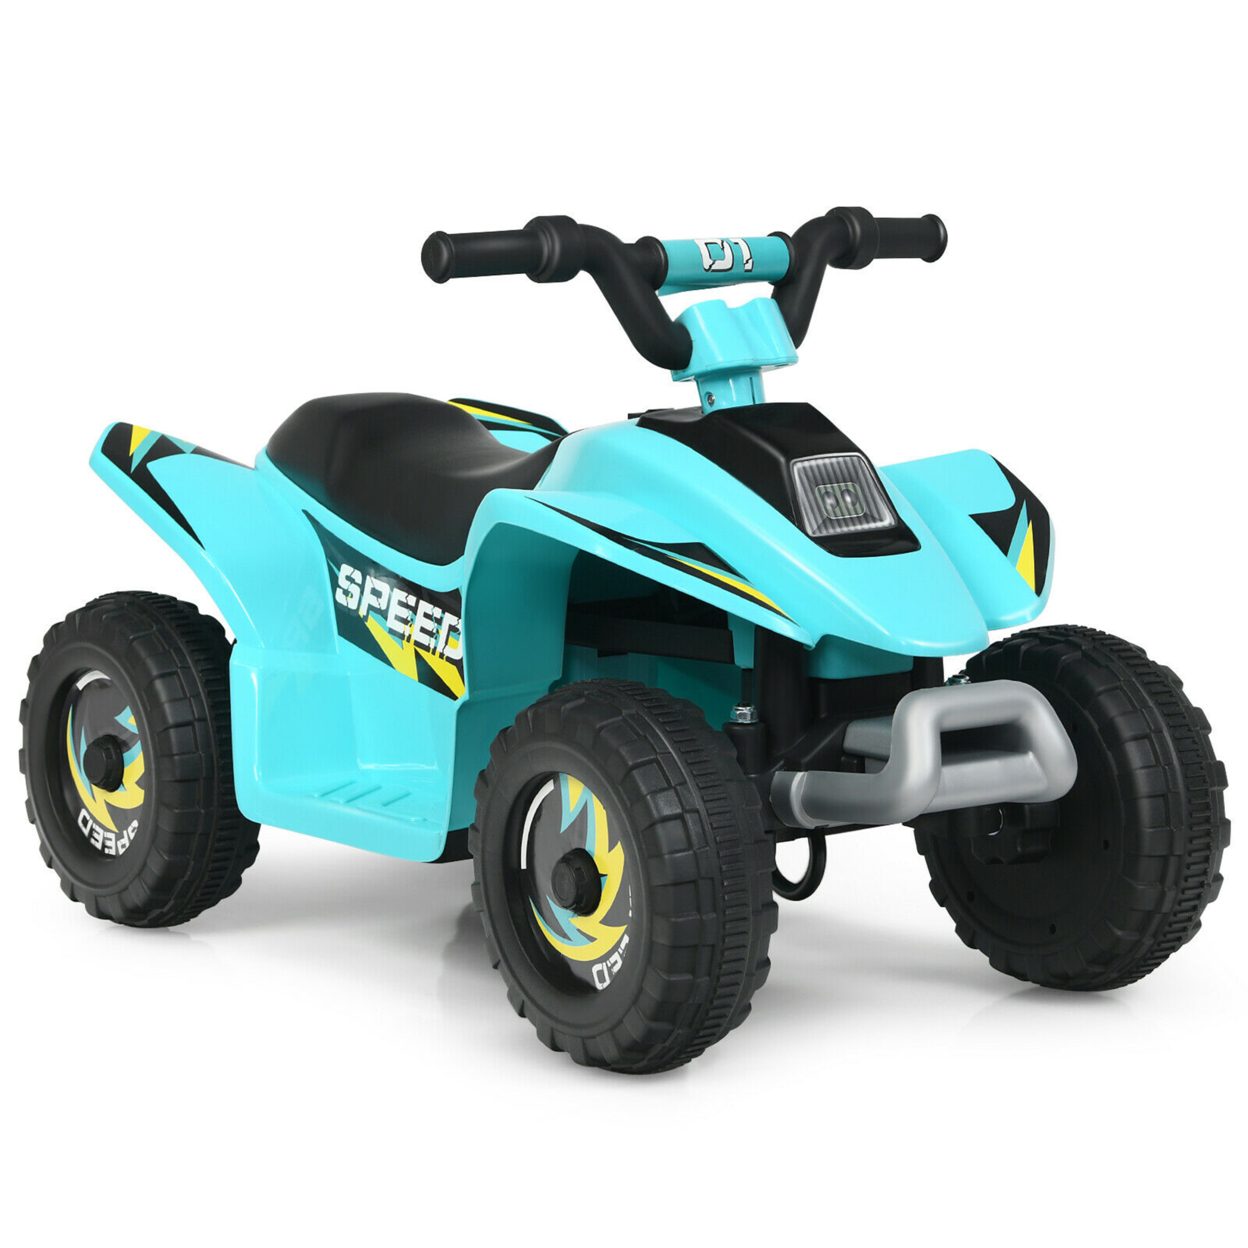 6V Kids Electric Quad ATV 4 Wheels Ride On Toy Toddlers Forward & Reverse - Blue